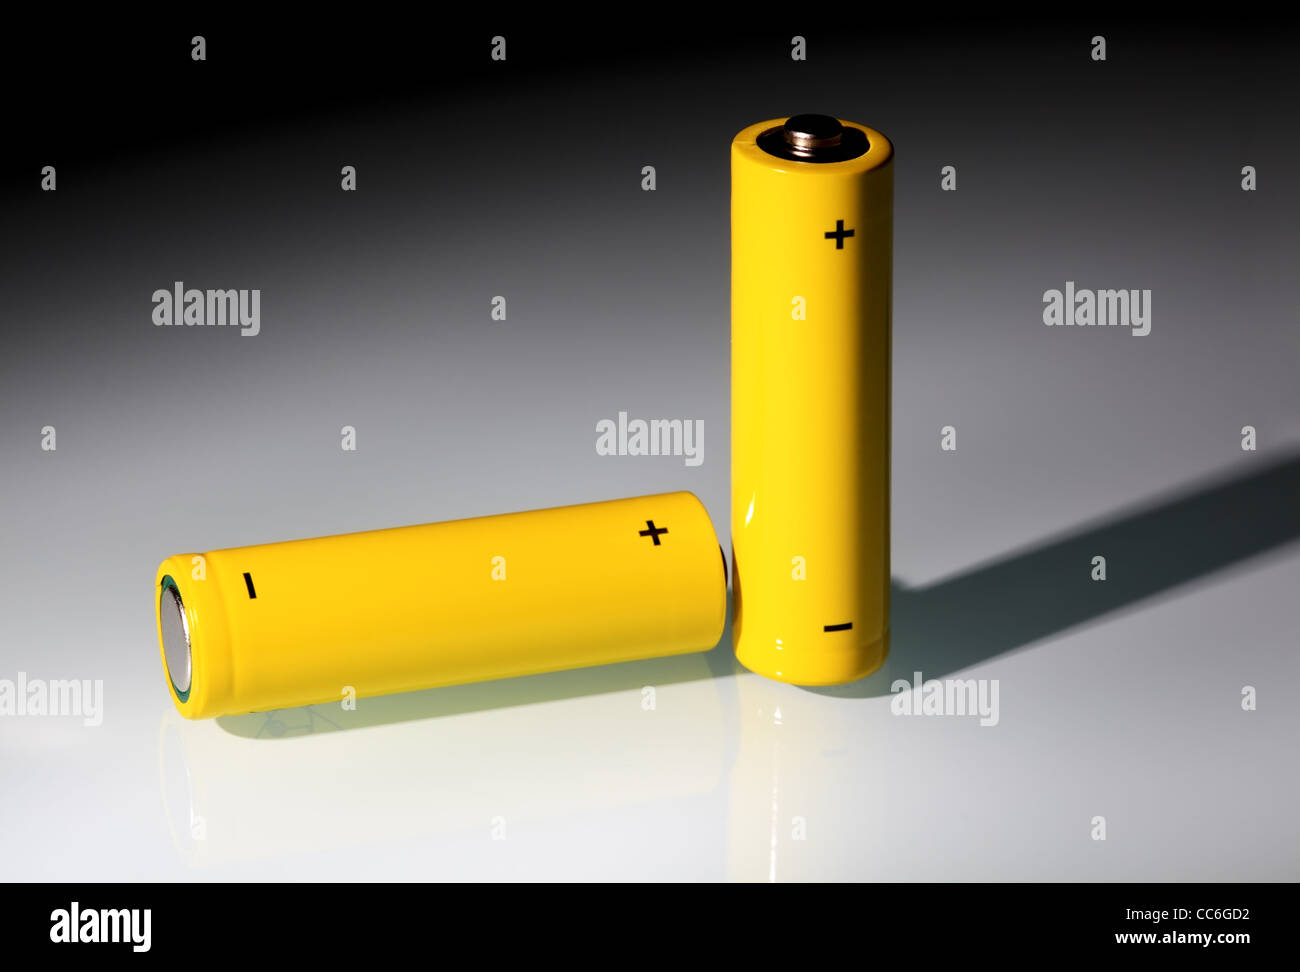 Two yellow AA-size batteries in a light beam. Ecology energy concept. Stock Photo